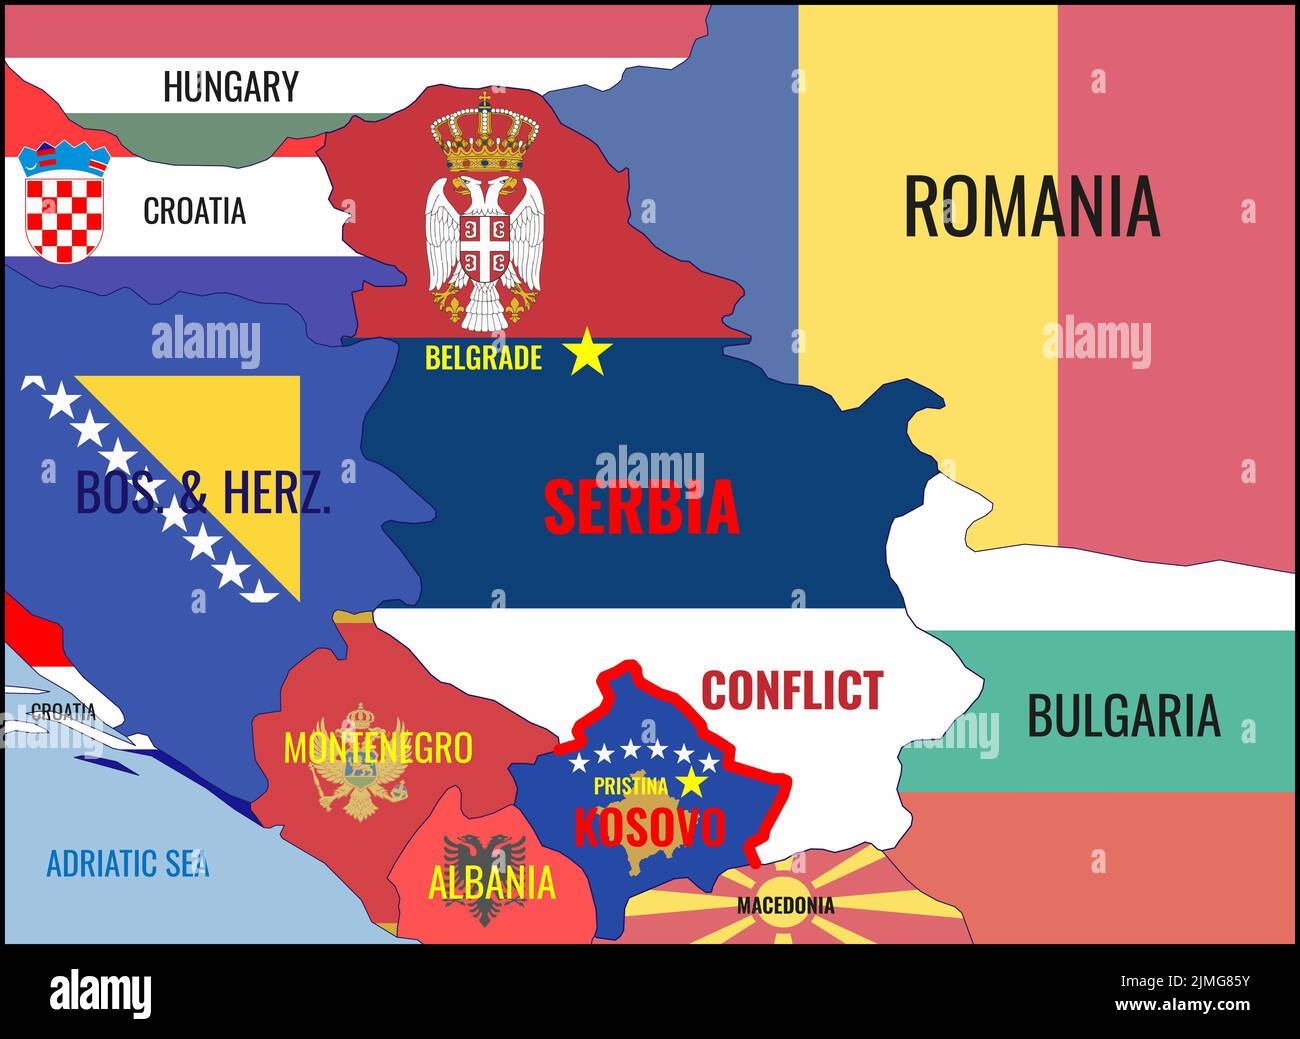 Illustration of a map of Serbia, Kosovo and neighboring countries with national flags. Conflict in the Balkans, Serbia and Kosovo. Stock Vector